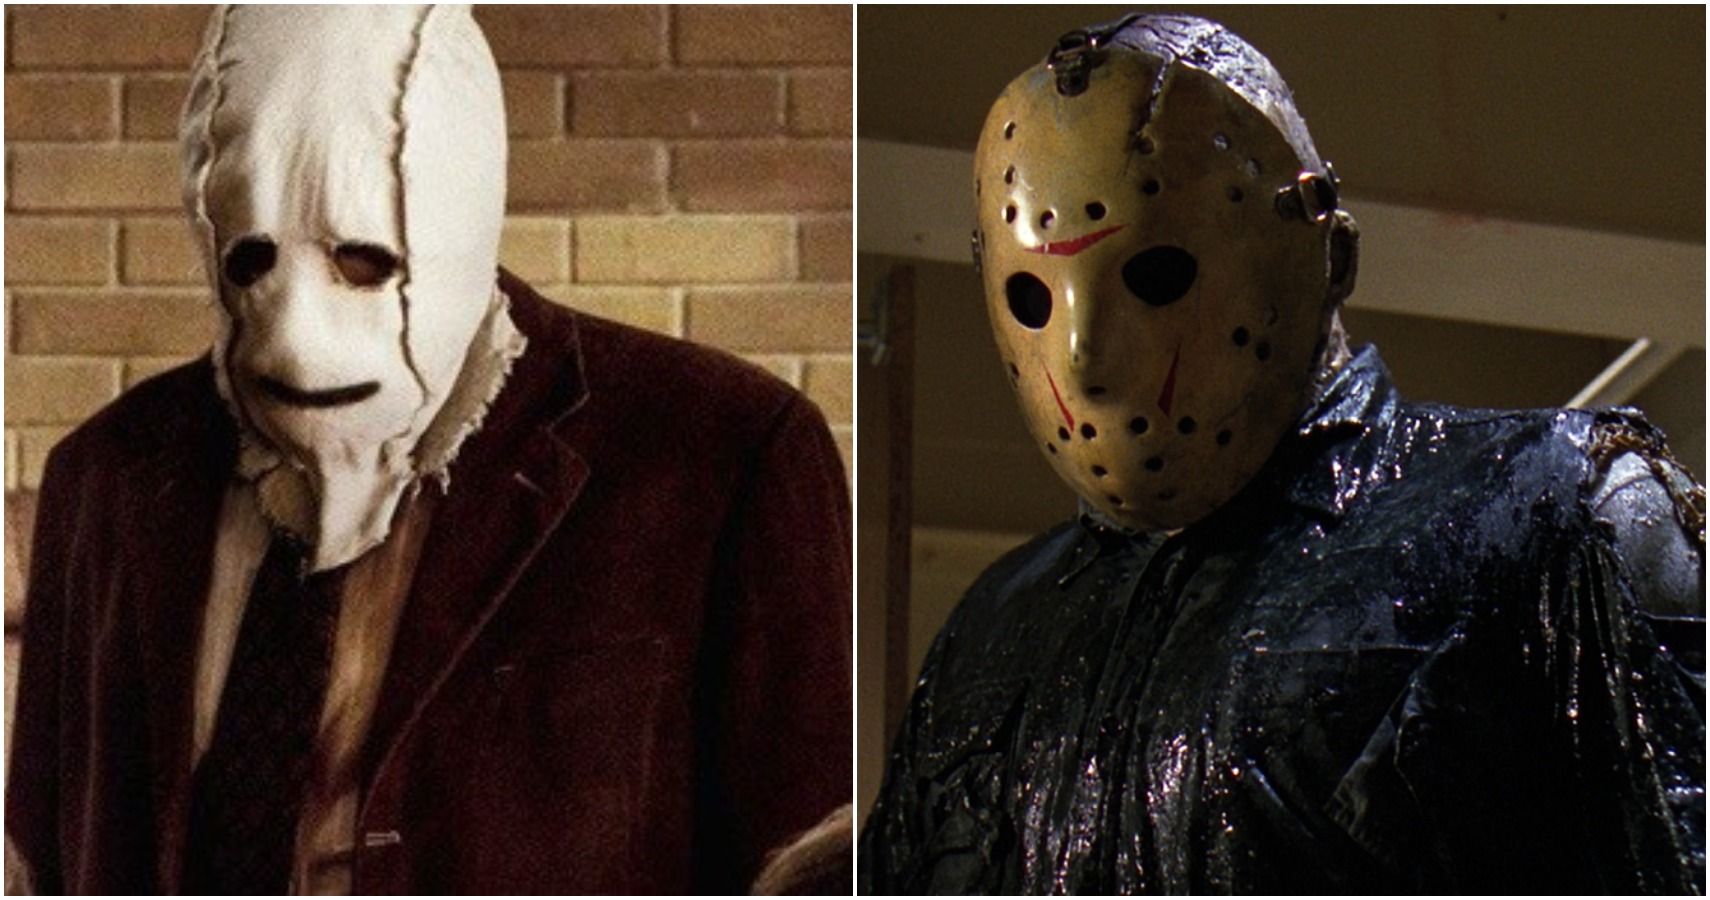 10 Of The Scariest Masked Horror Movie Maniacs, Ranked